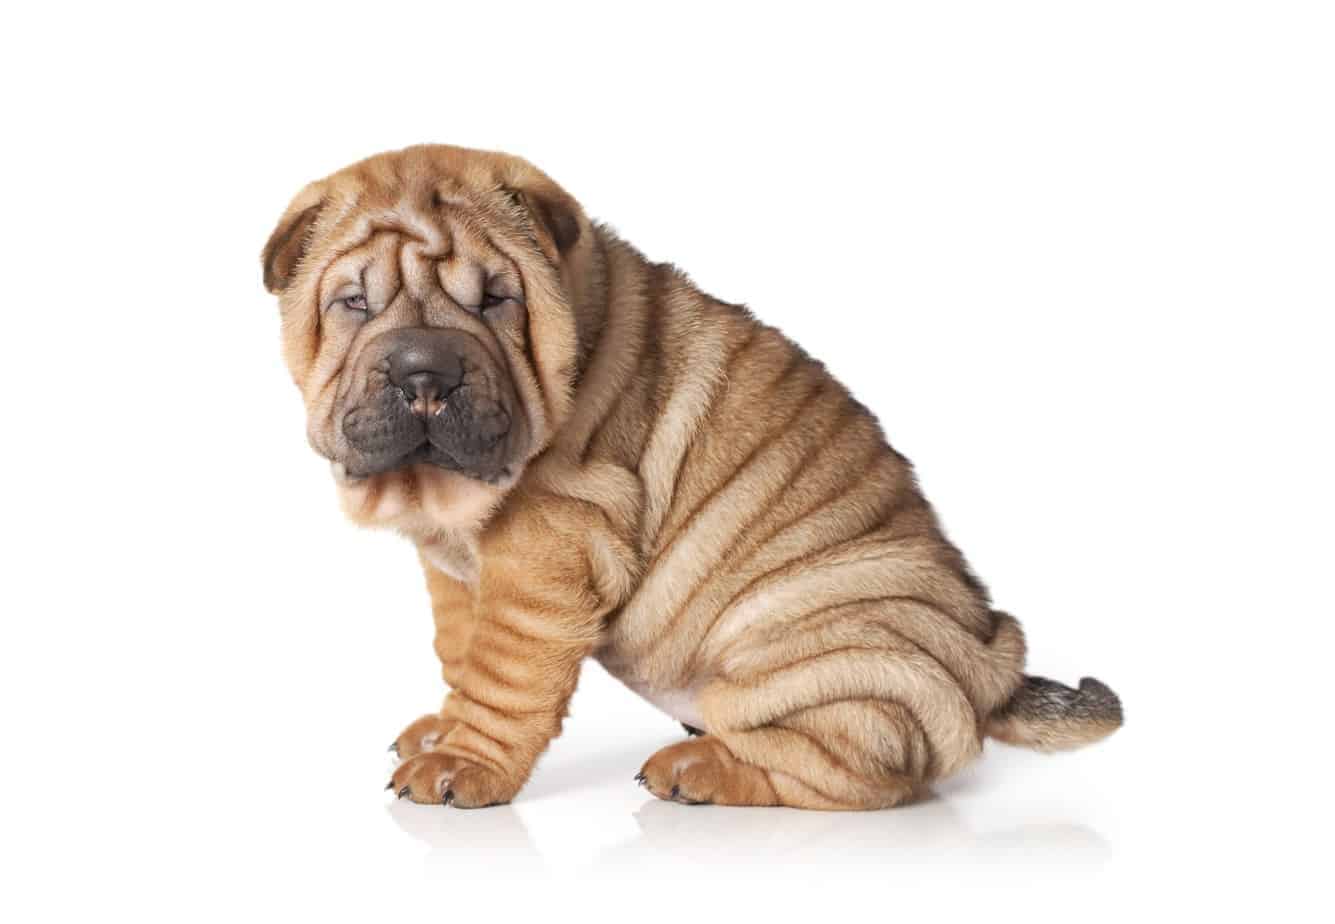 Dog breeds like Shar-Peis benefit from animal plastic surgery, which can correct health problems caused by selective breeding.